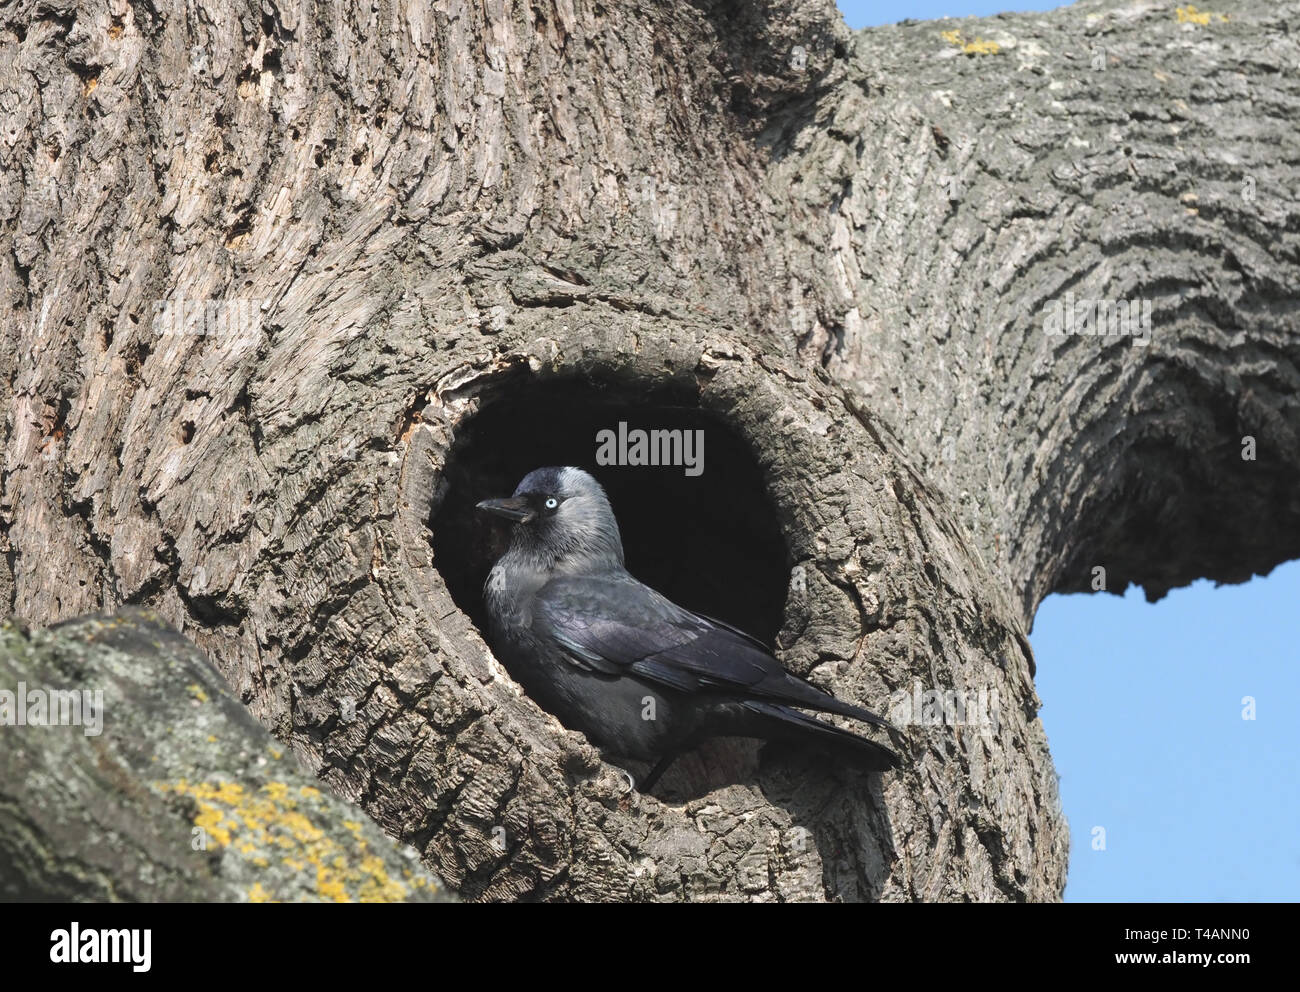 Jackdaw in tree Banque D'Images